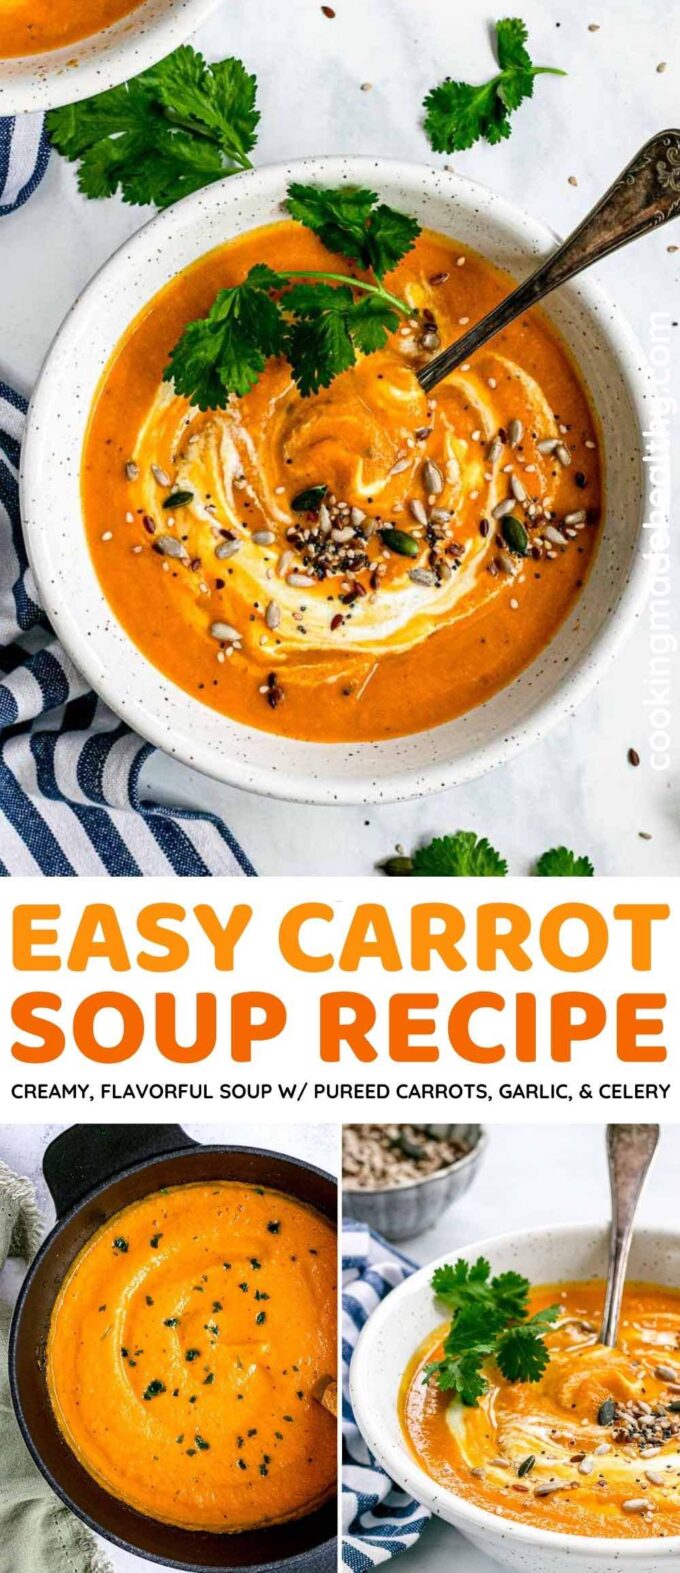 Carrot Soup Recipe - Cooking Made Healthy